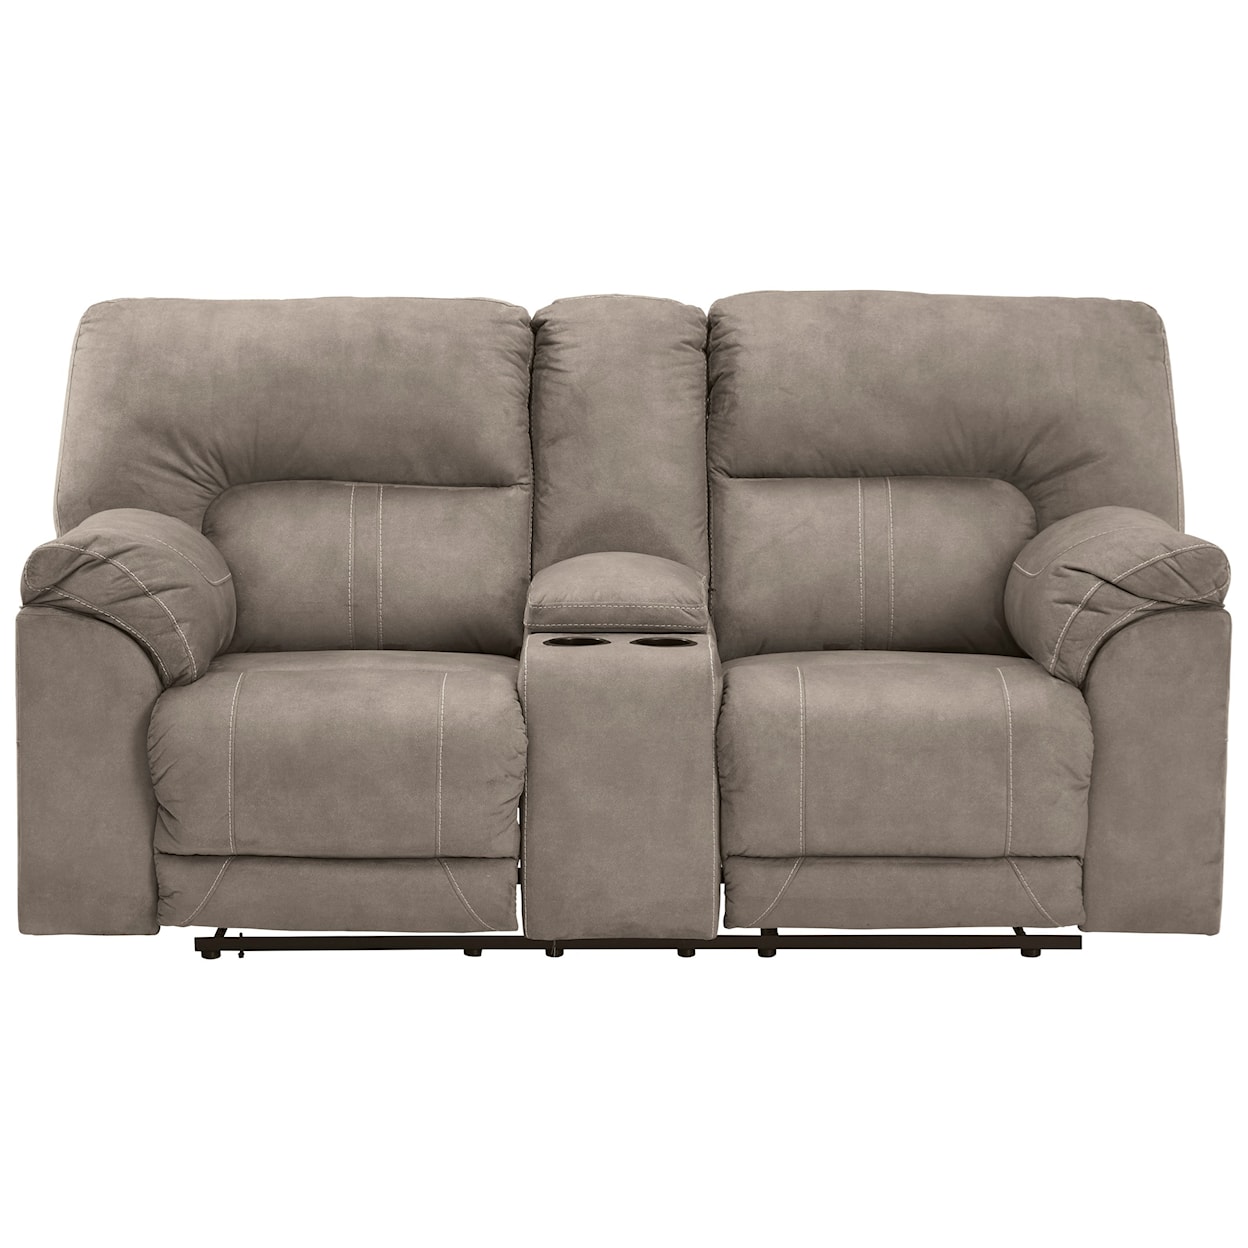 JB King Temper Double Reclining Loveseat with Console